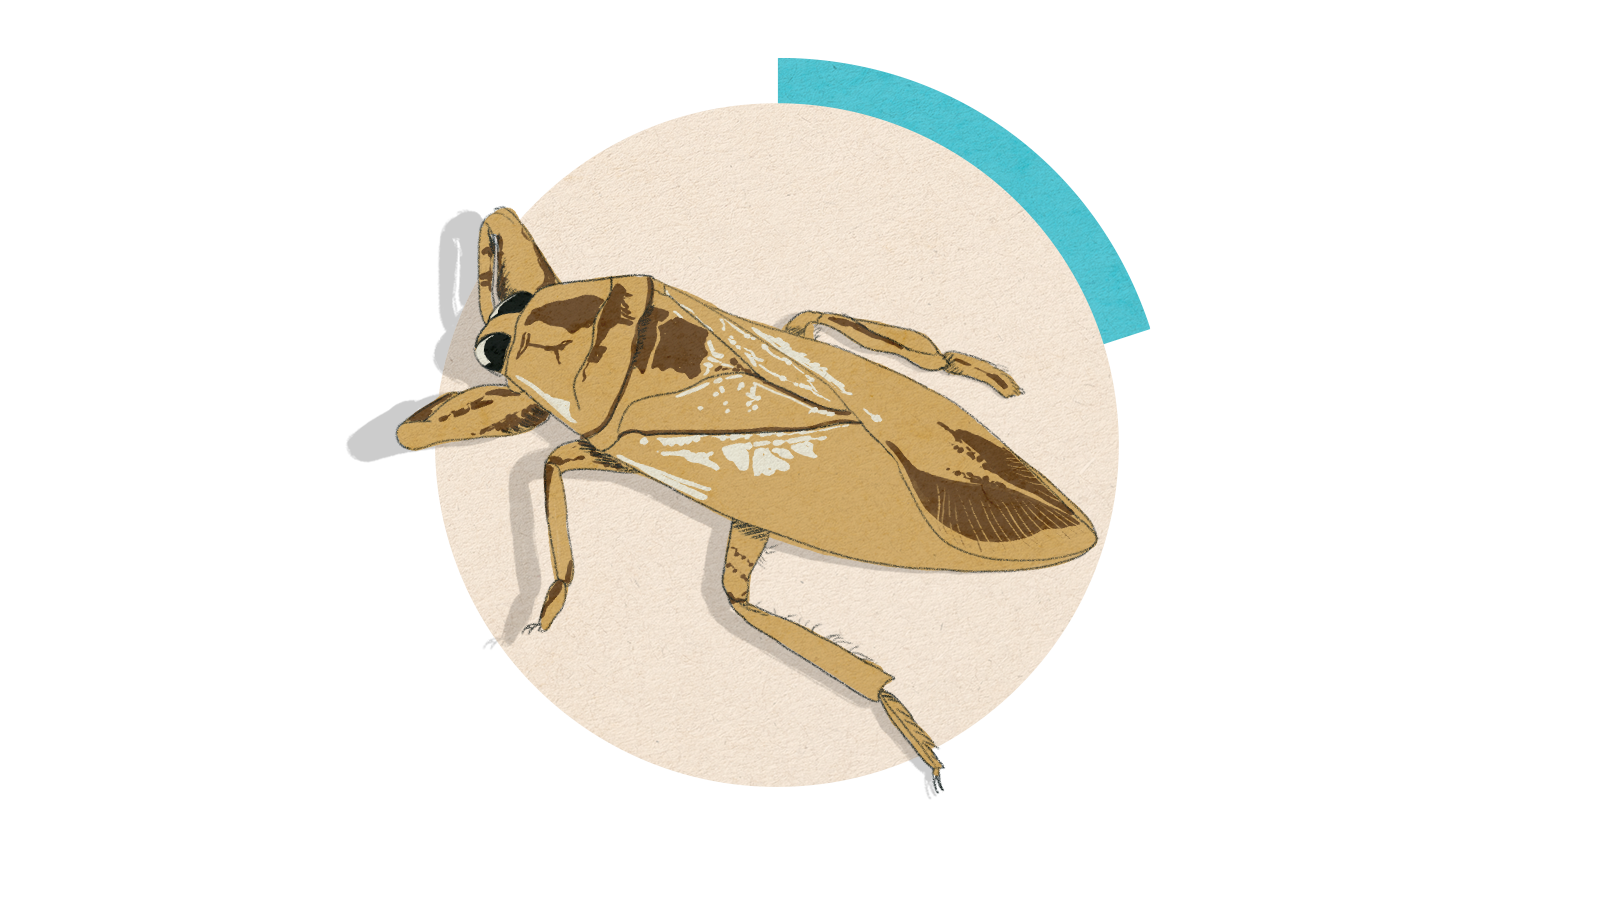 Illustration of a giant water bug on a circle background.